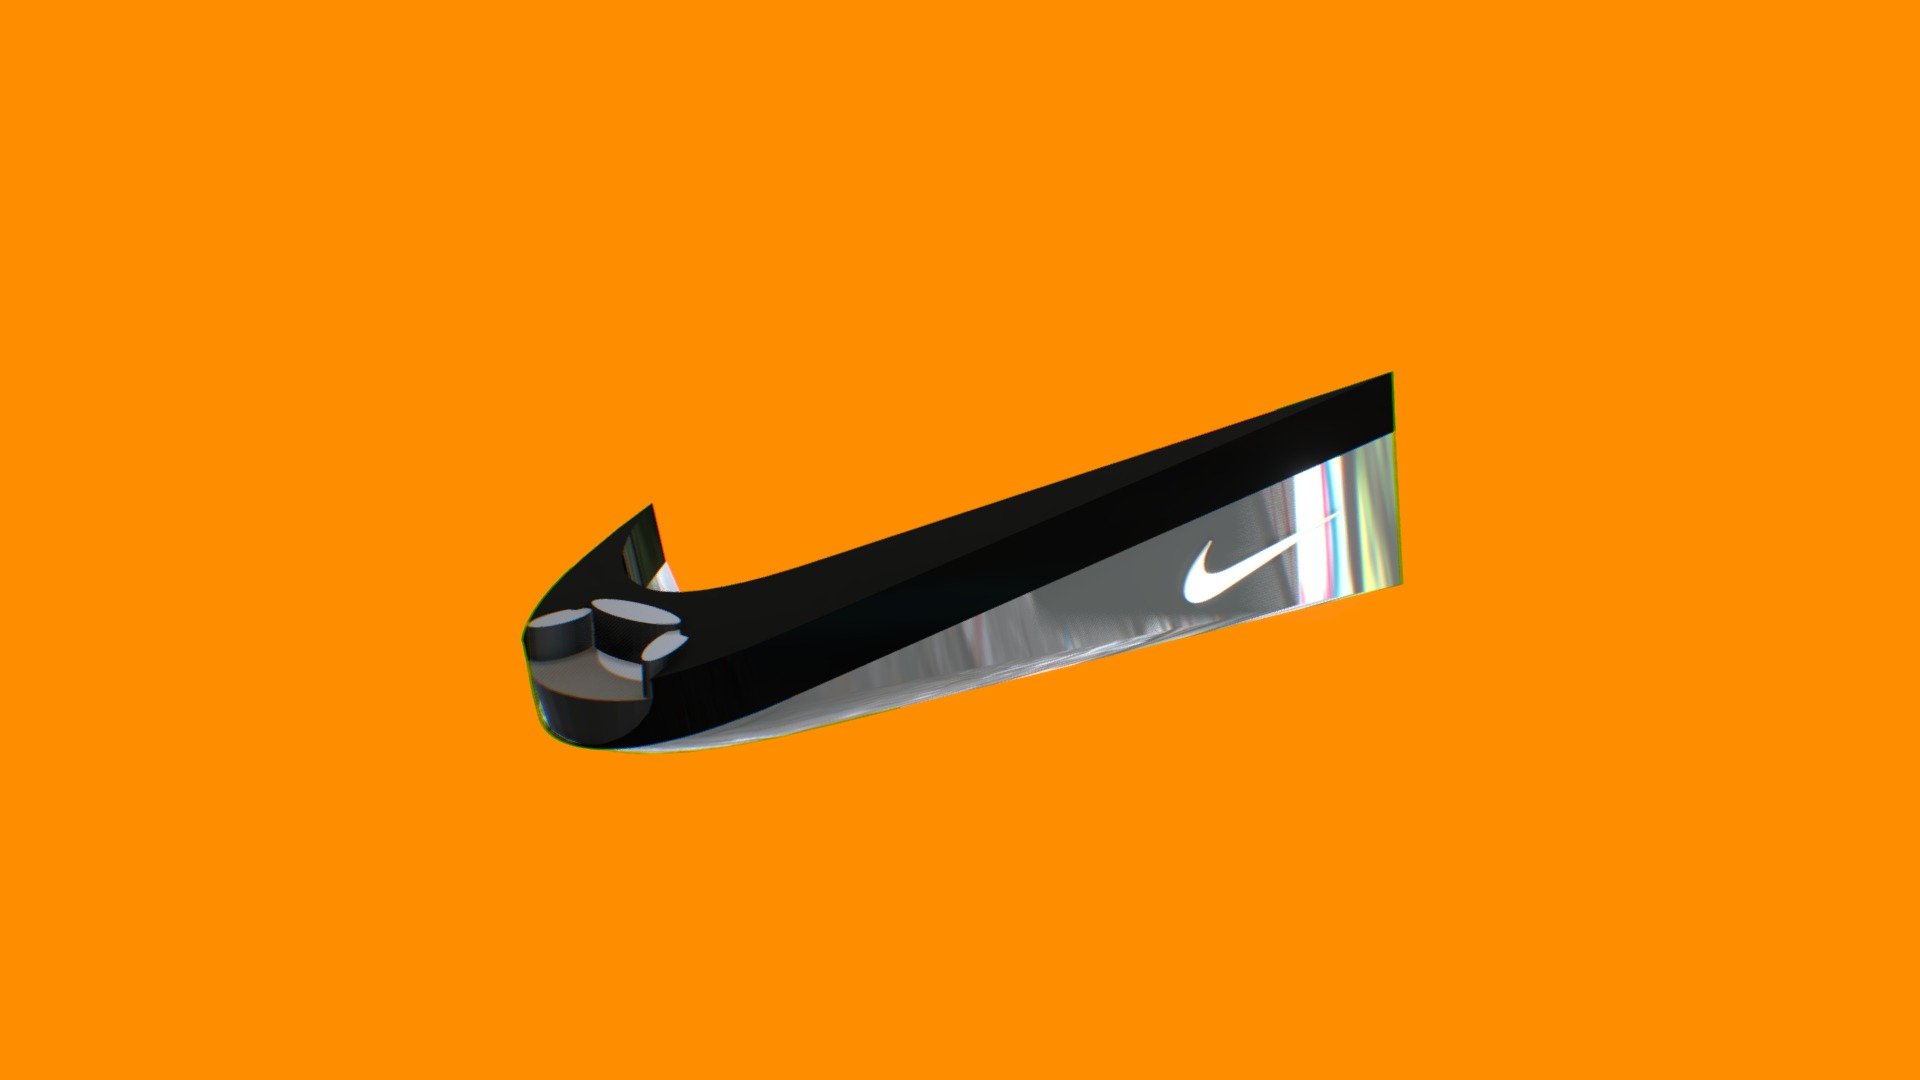 A 3D Concept Furniture Design of a NIKE logo seat that i came up with made in Blender.

Part of my &ldquo;LOGO-Furniture